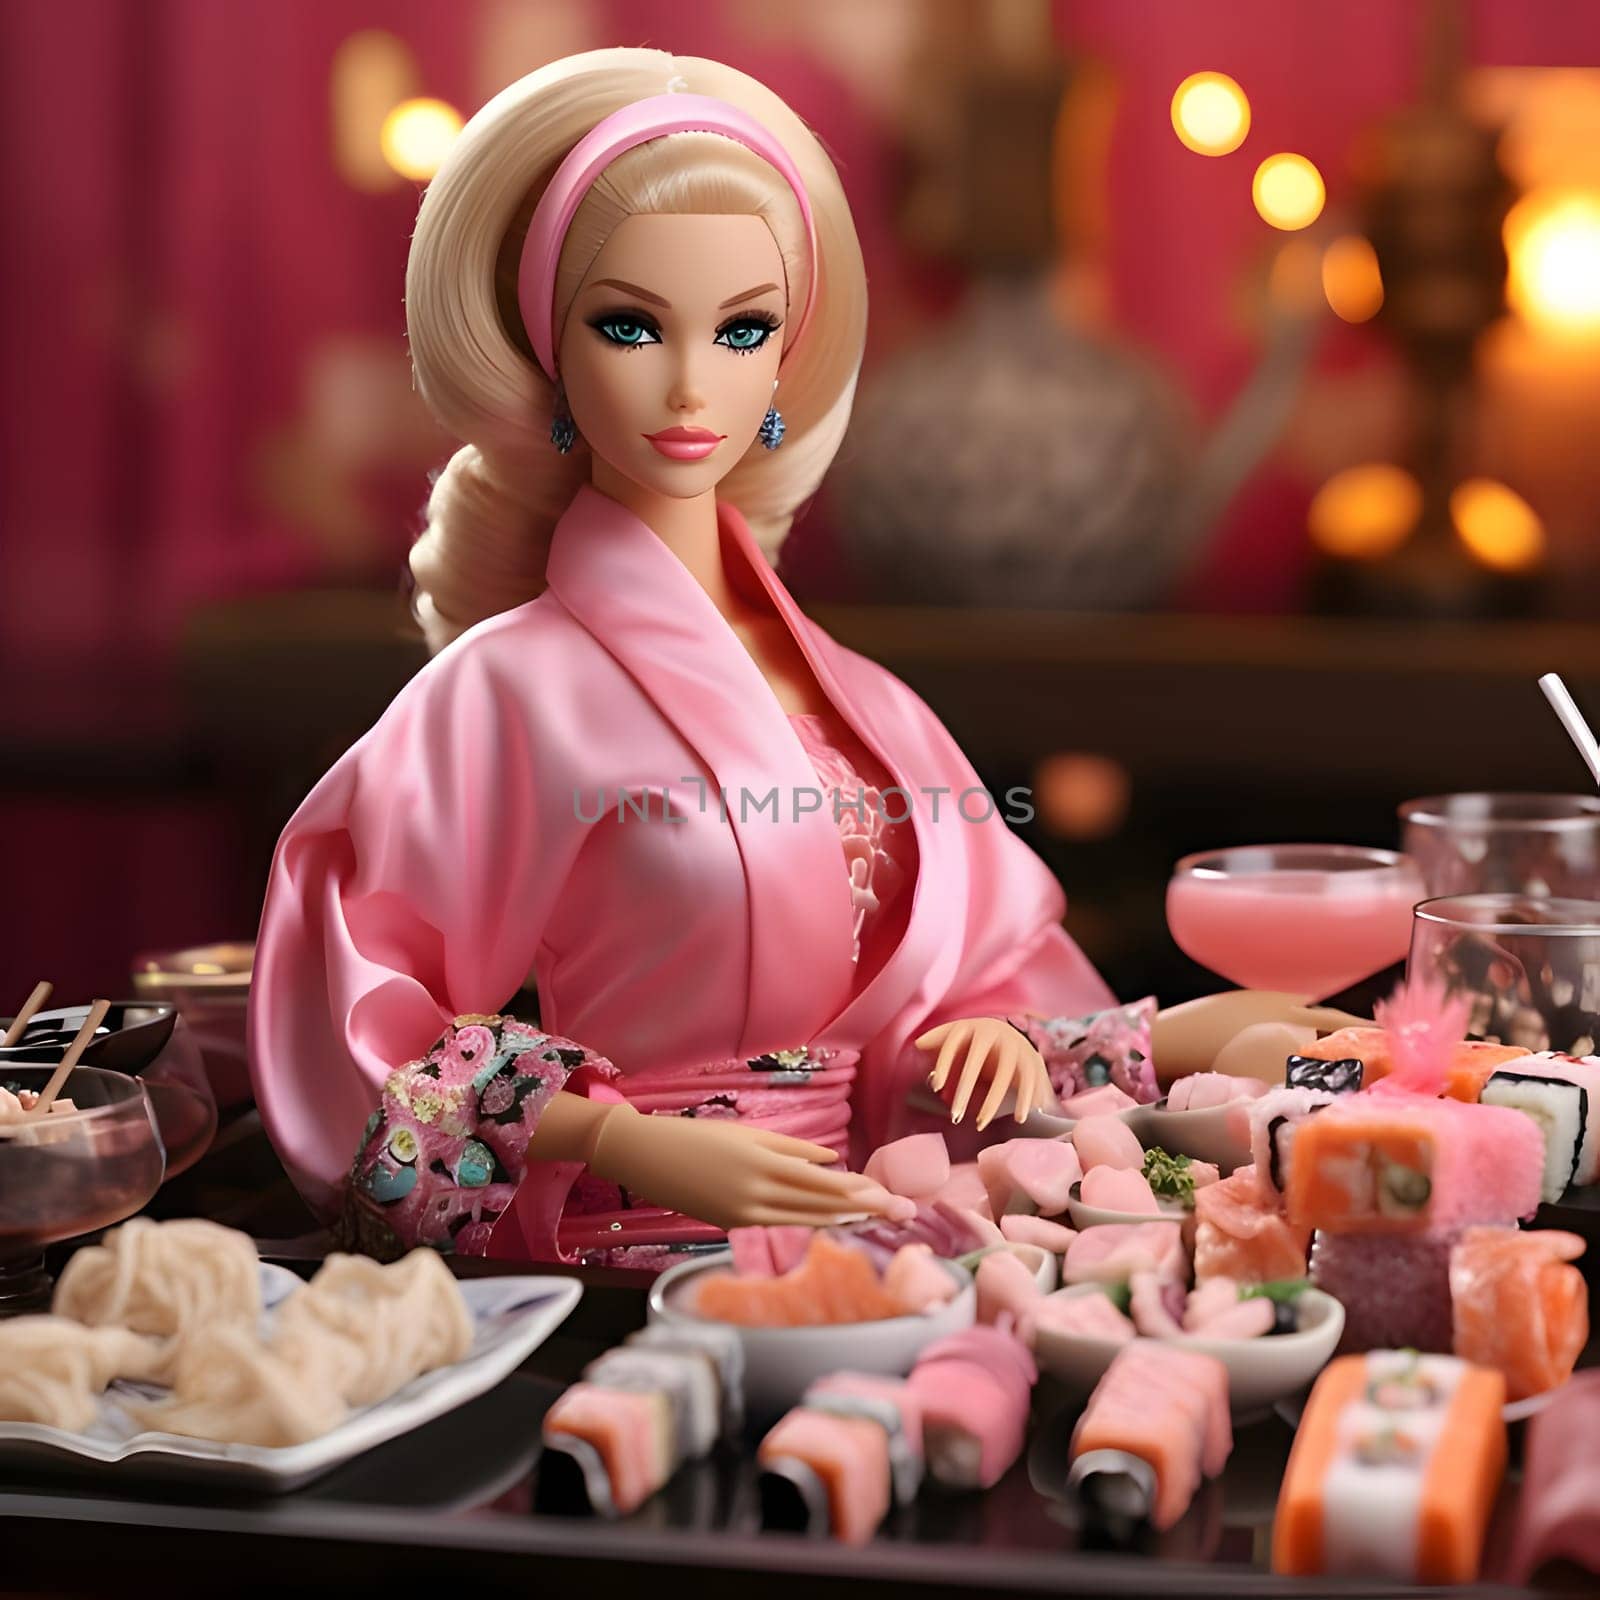 Blonde-haired Barbie dressed in pink attire, sitting at a table beautifully set with sushi delicacies.